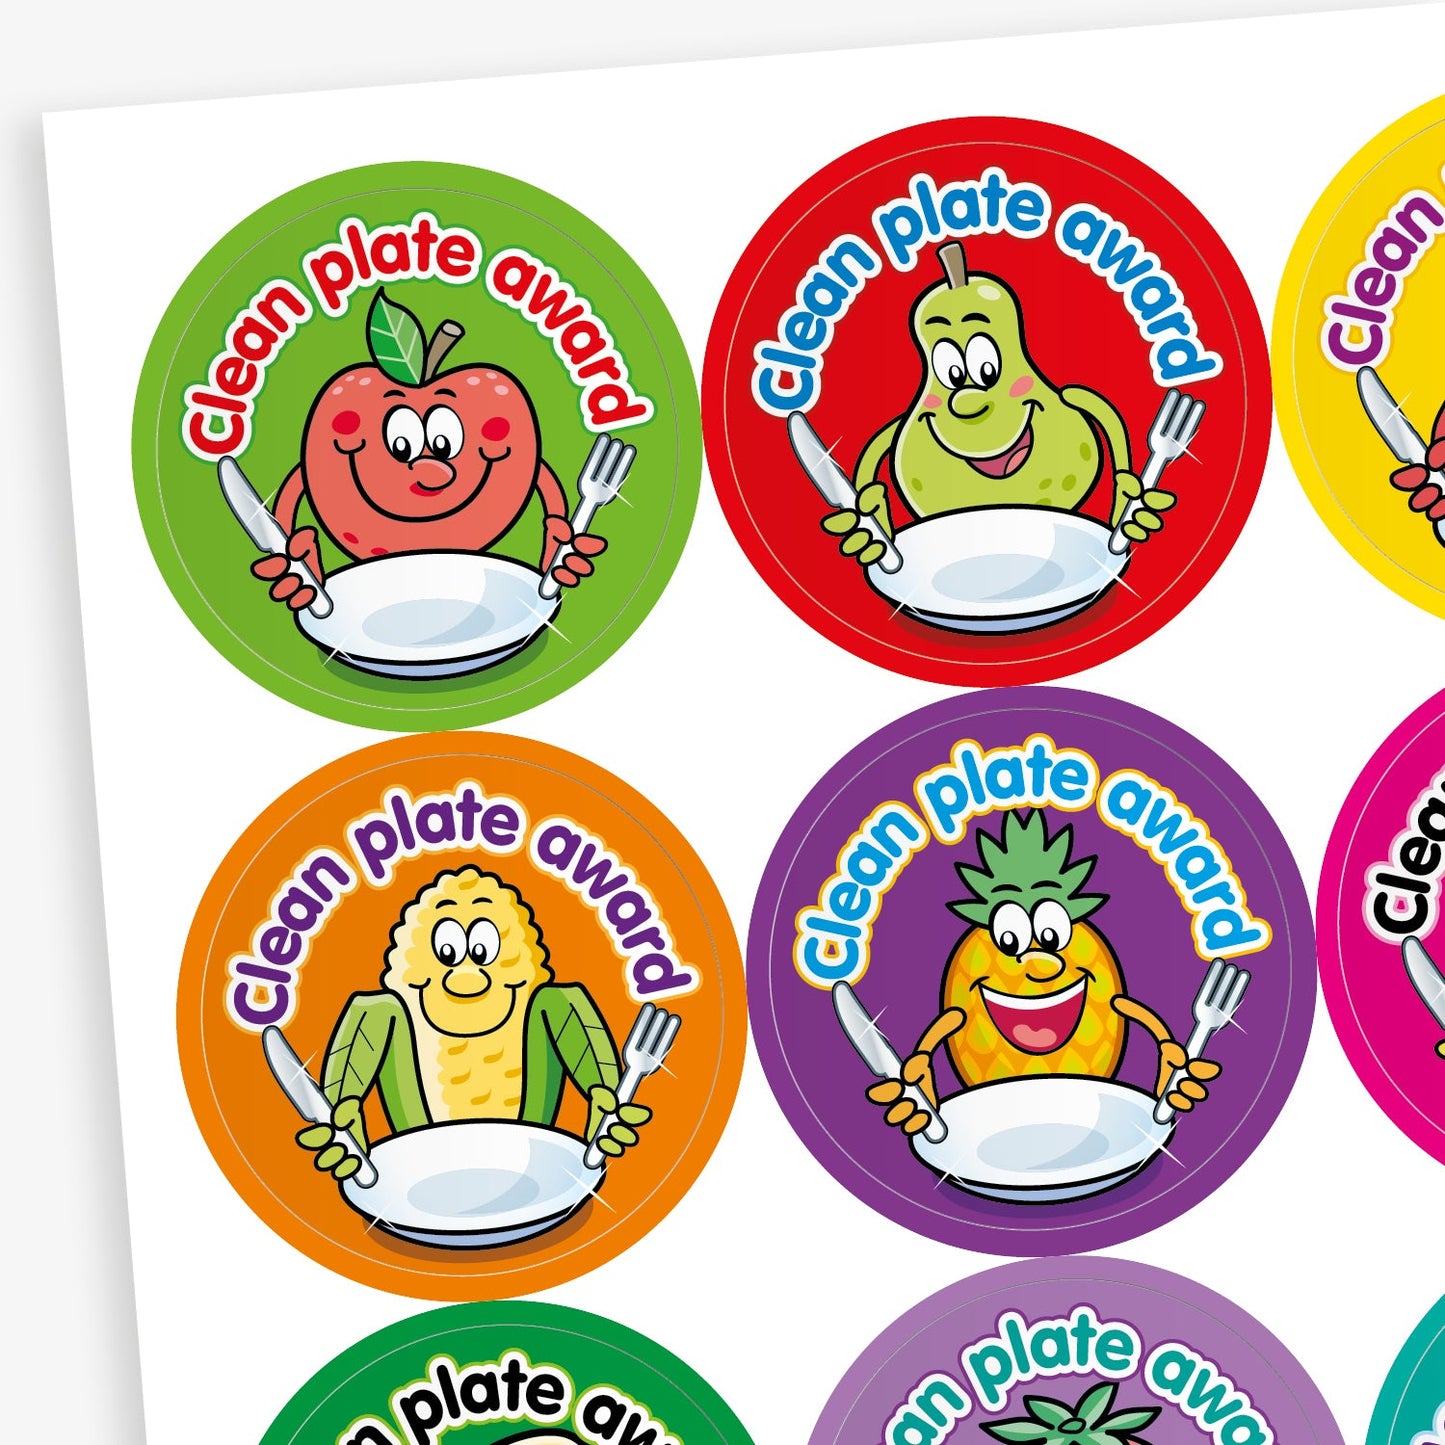 Clean Plate Award Stickers - 32mm